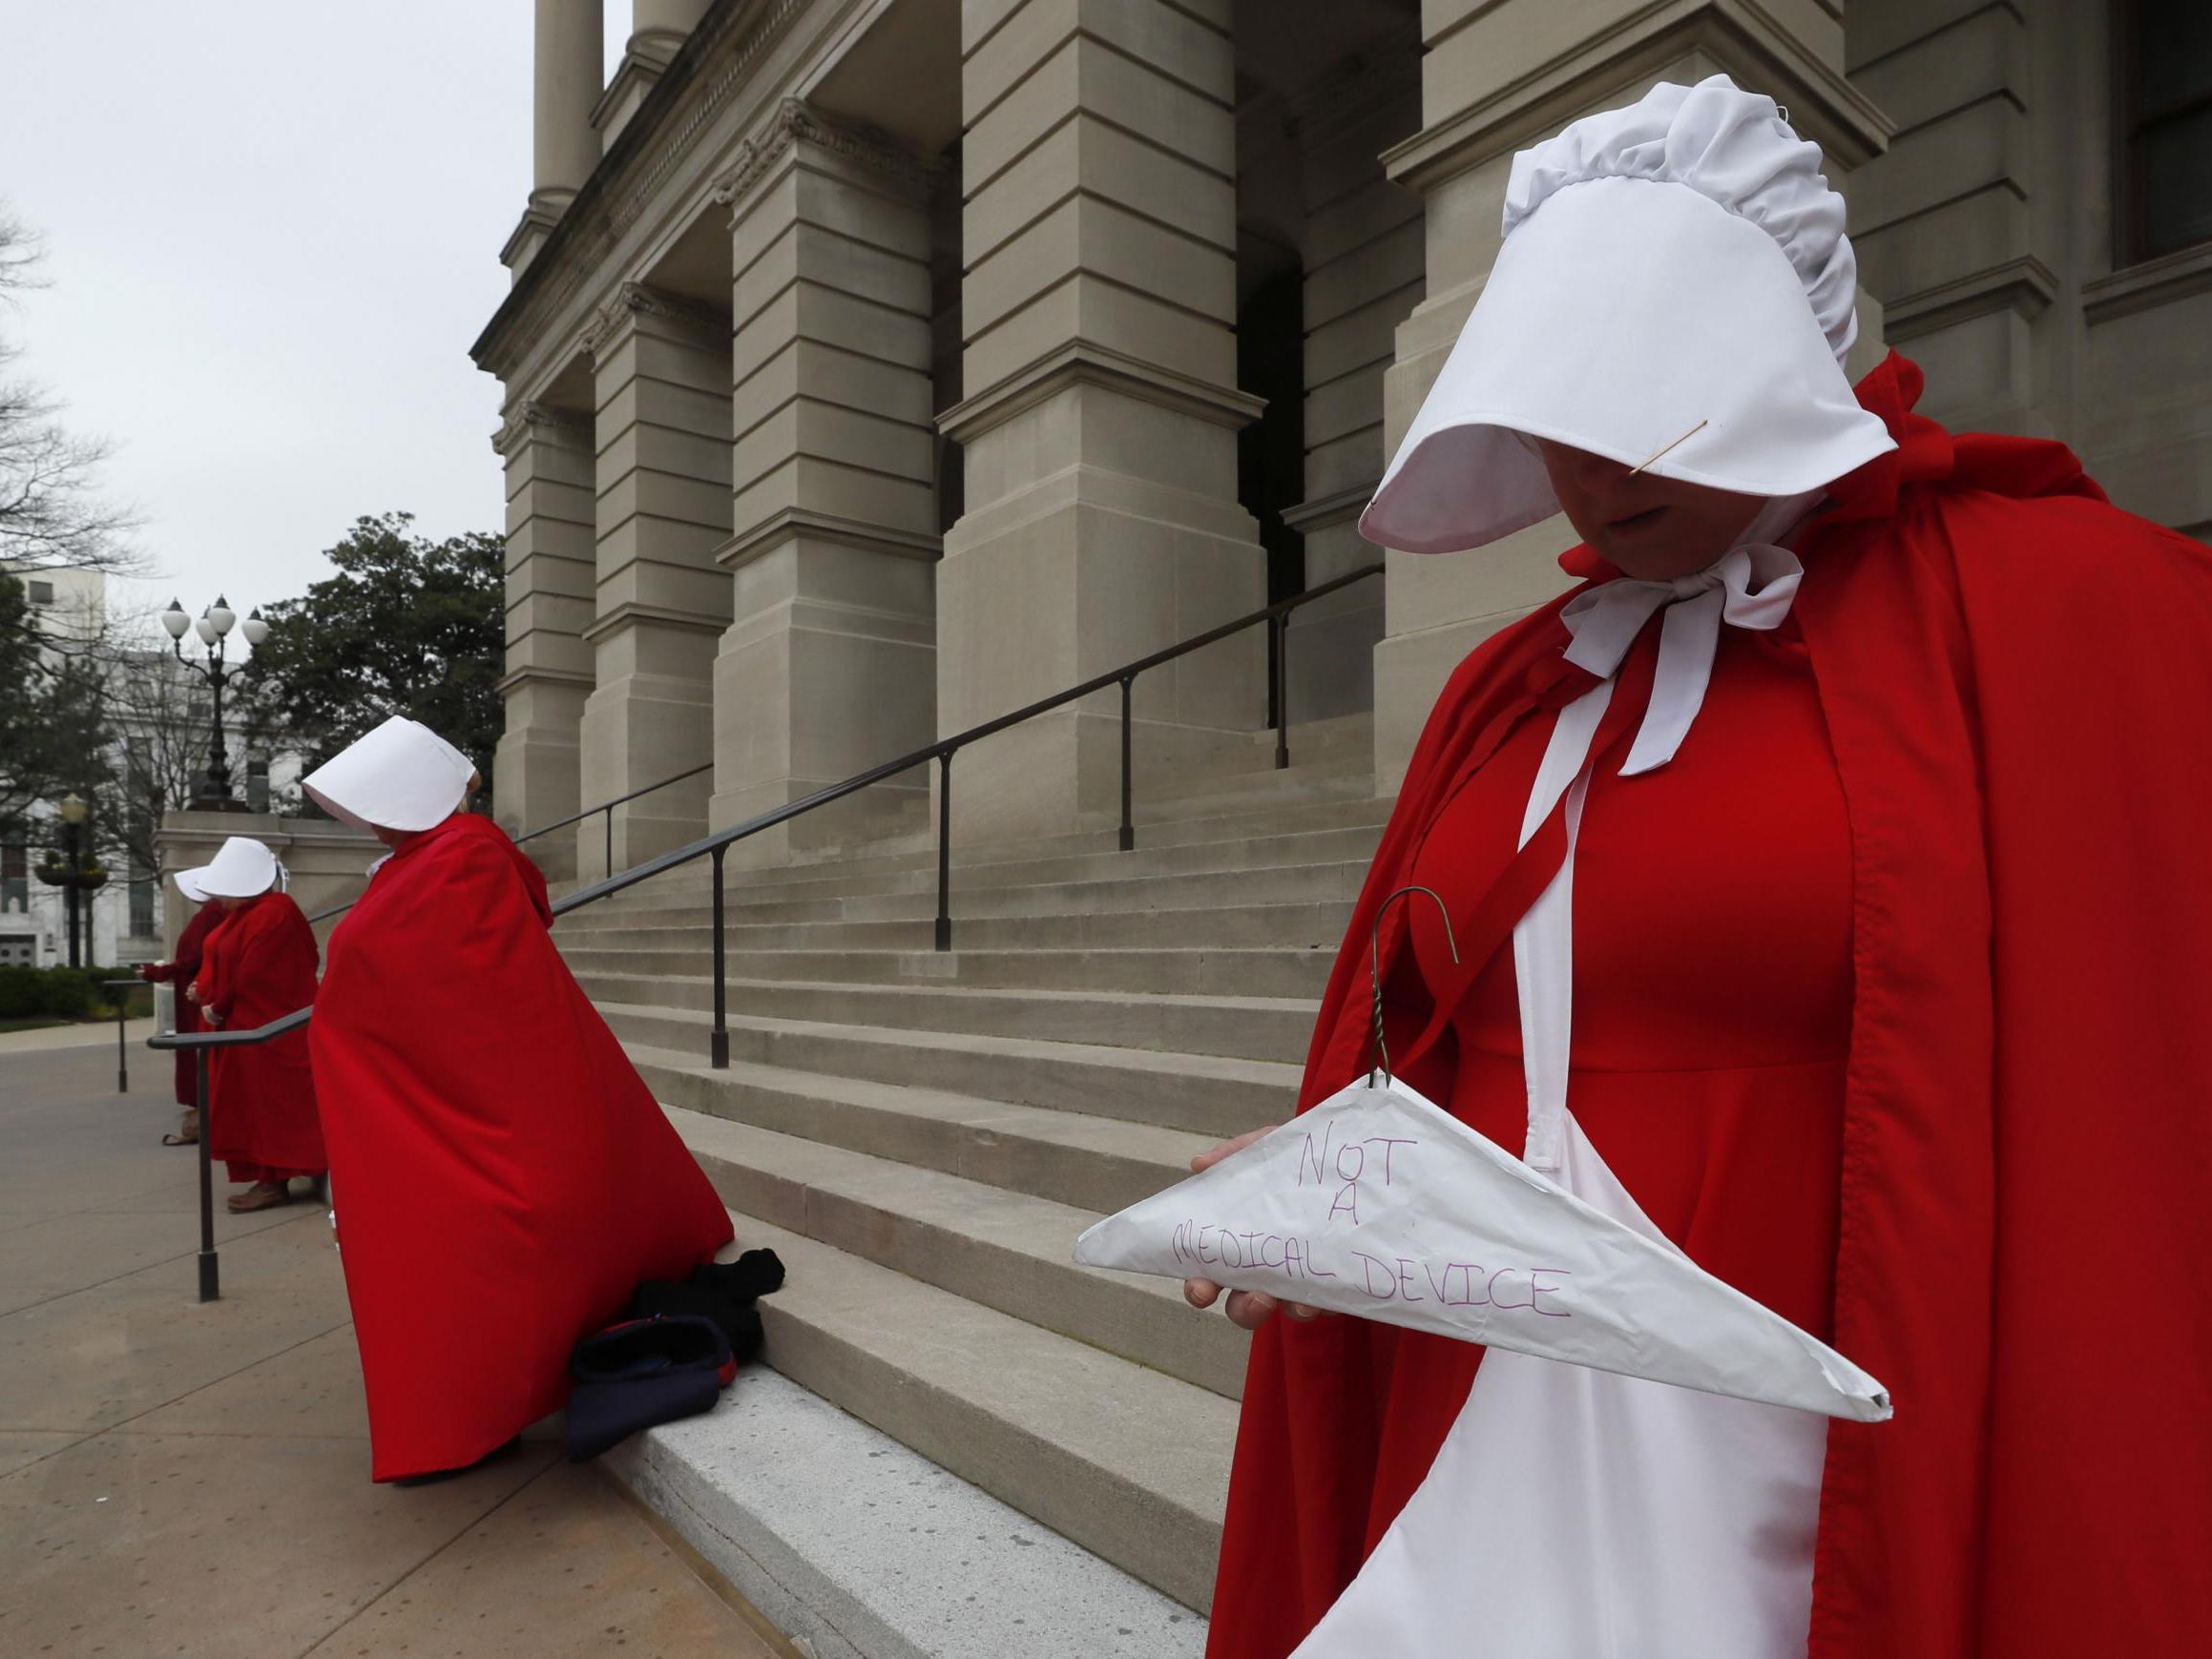 Women dressed as characters from 'The Handmaid's Tale' protest abortion restrictions in Georgia (File photo)